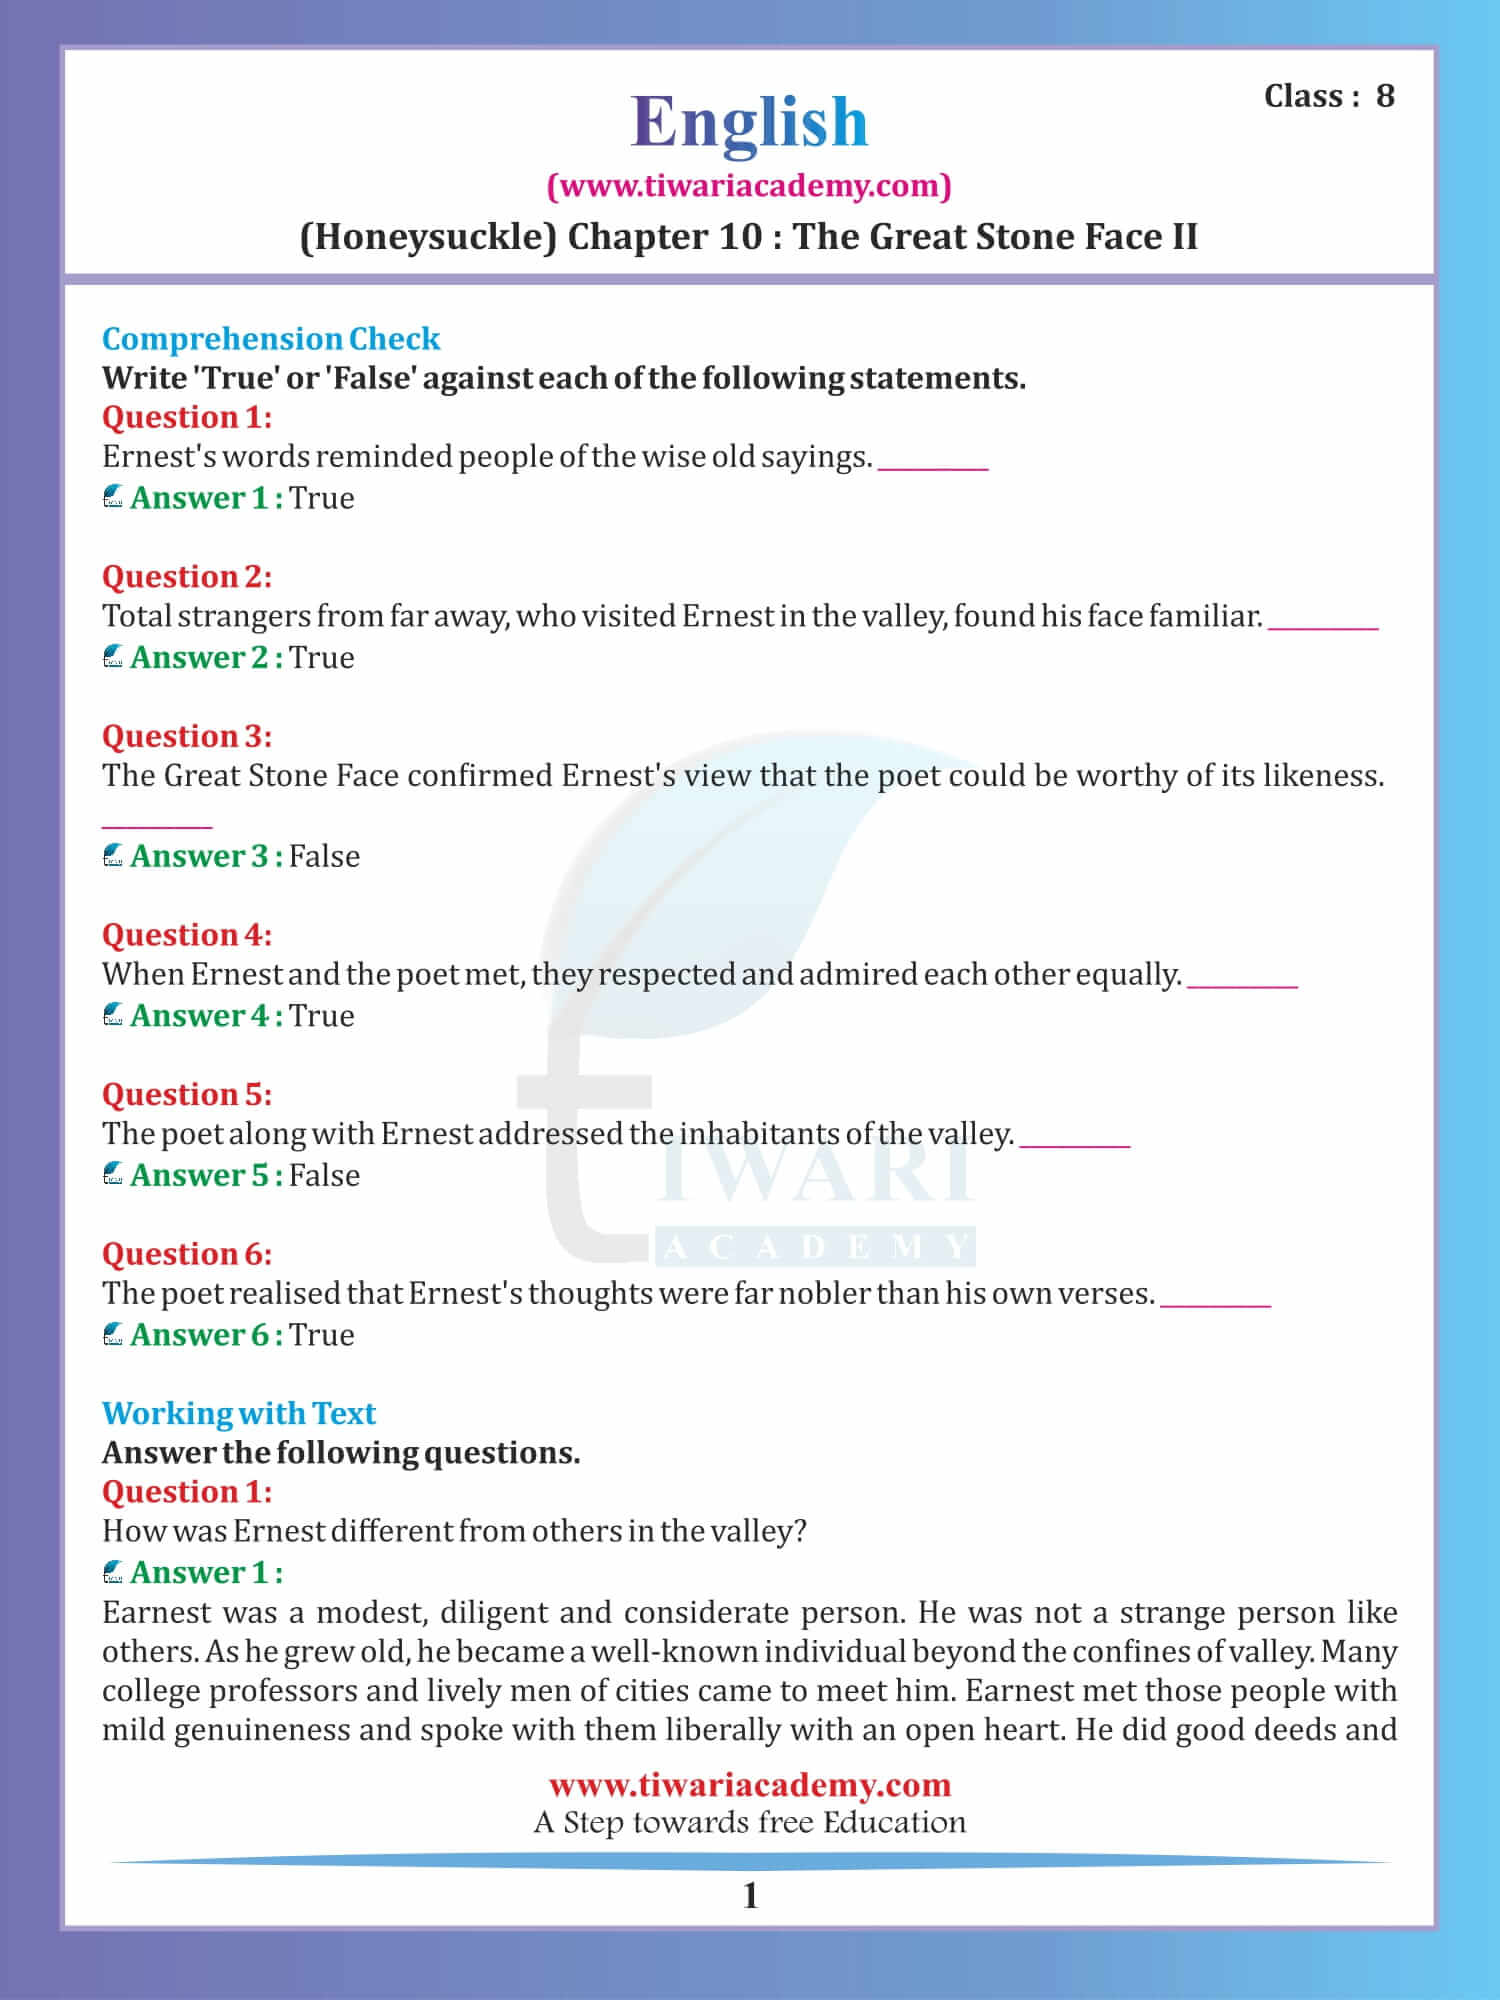 Class 8 English Honeydew Chapter 10 The Great Stone Face - II